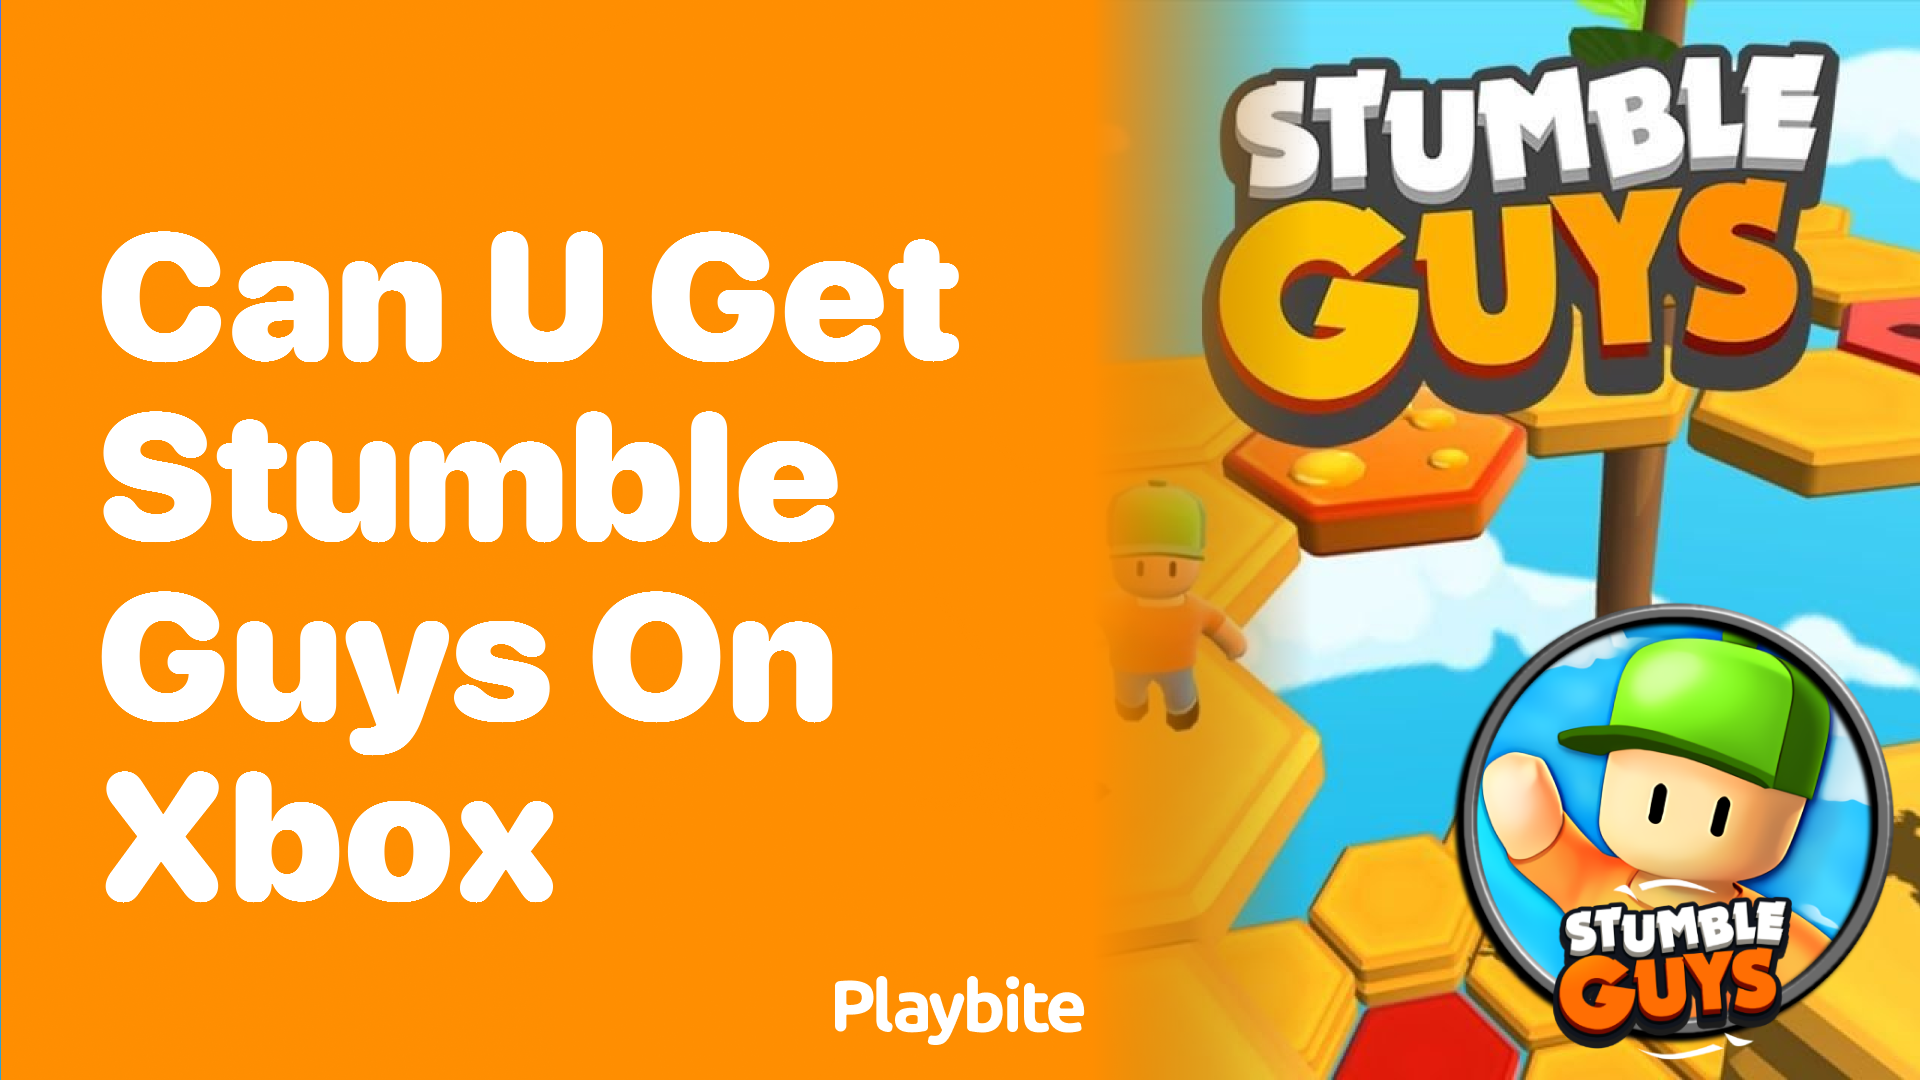 Can You Get Stumble Guys on Xbox? Let&#8217;s Find Out!